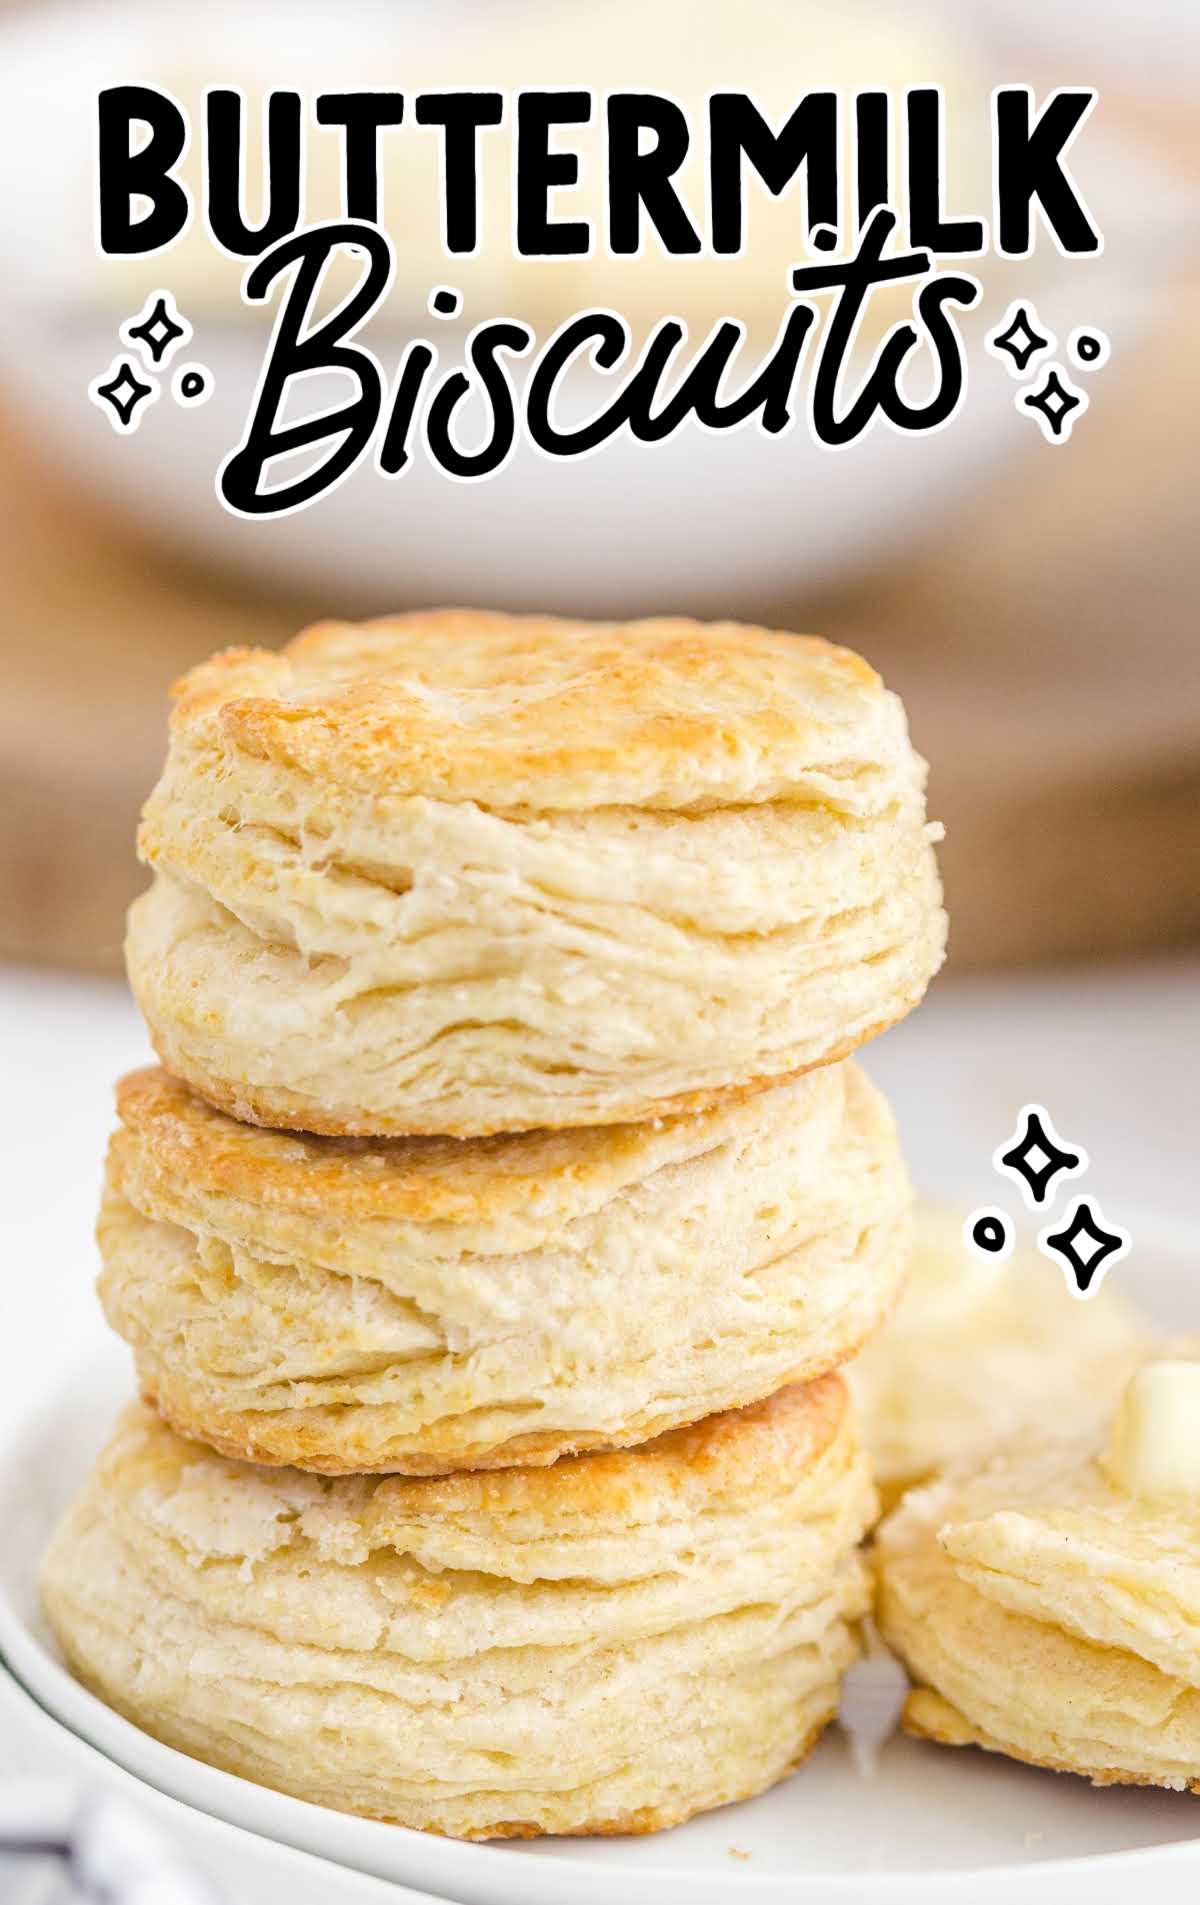 buttermilk biscuits stacked on top of each other